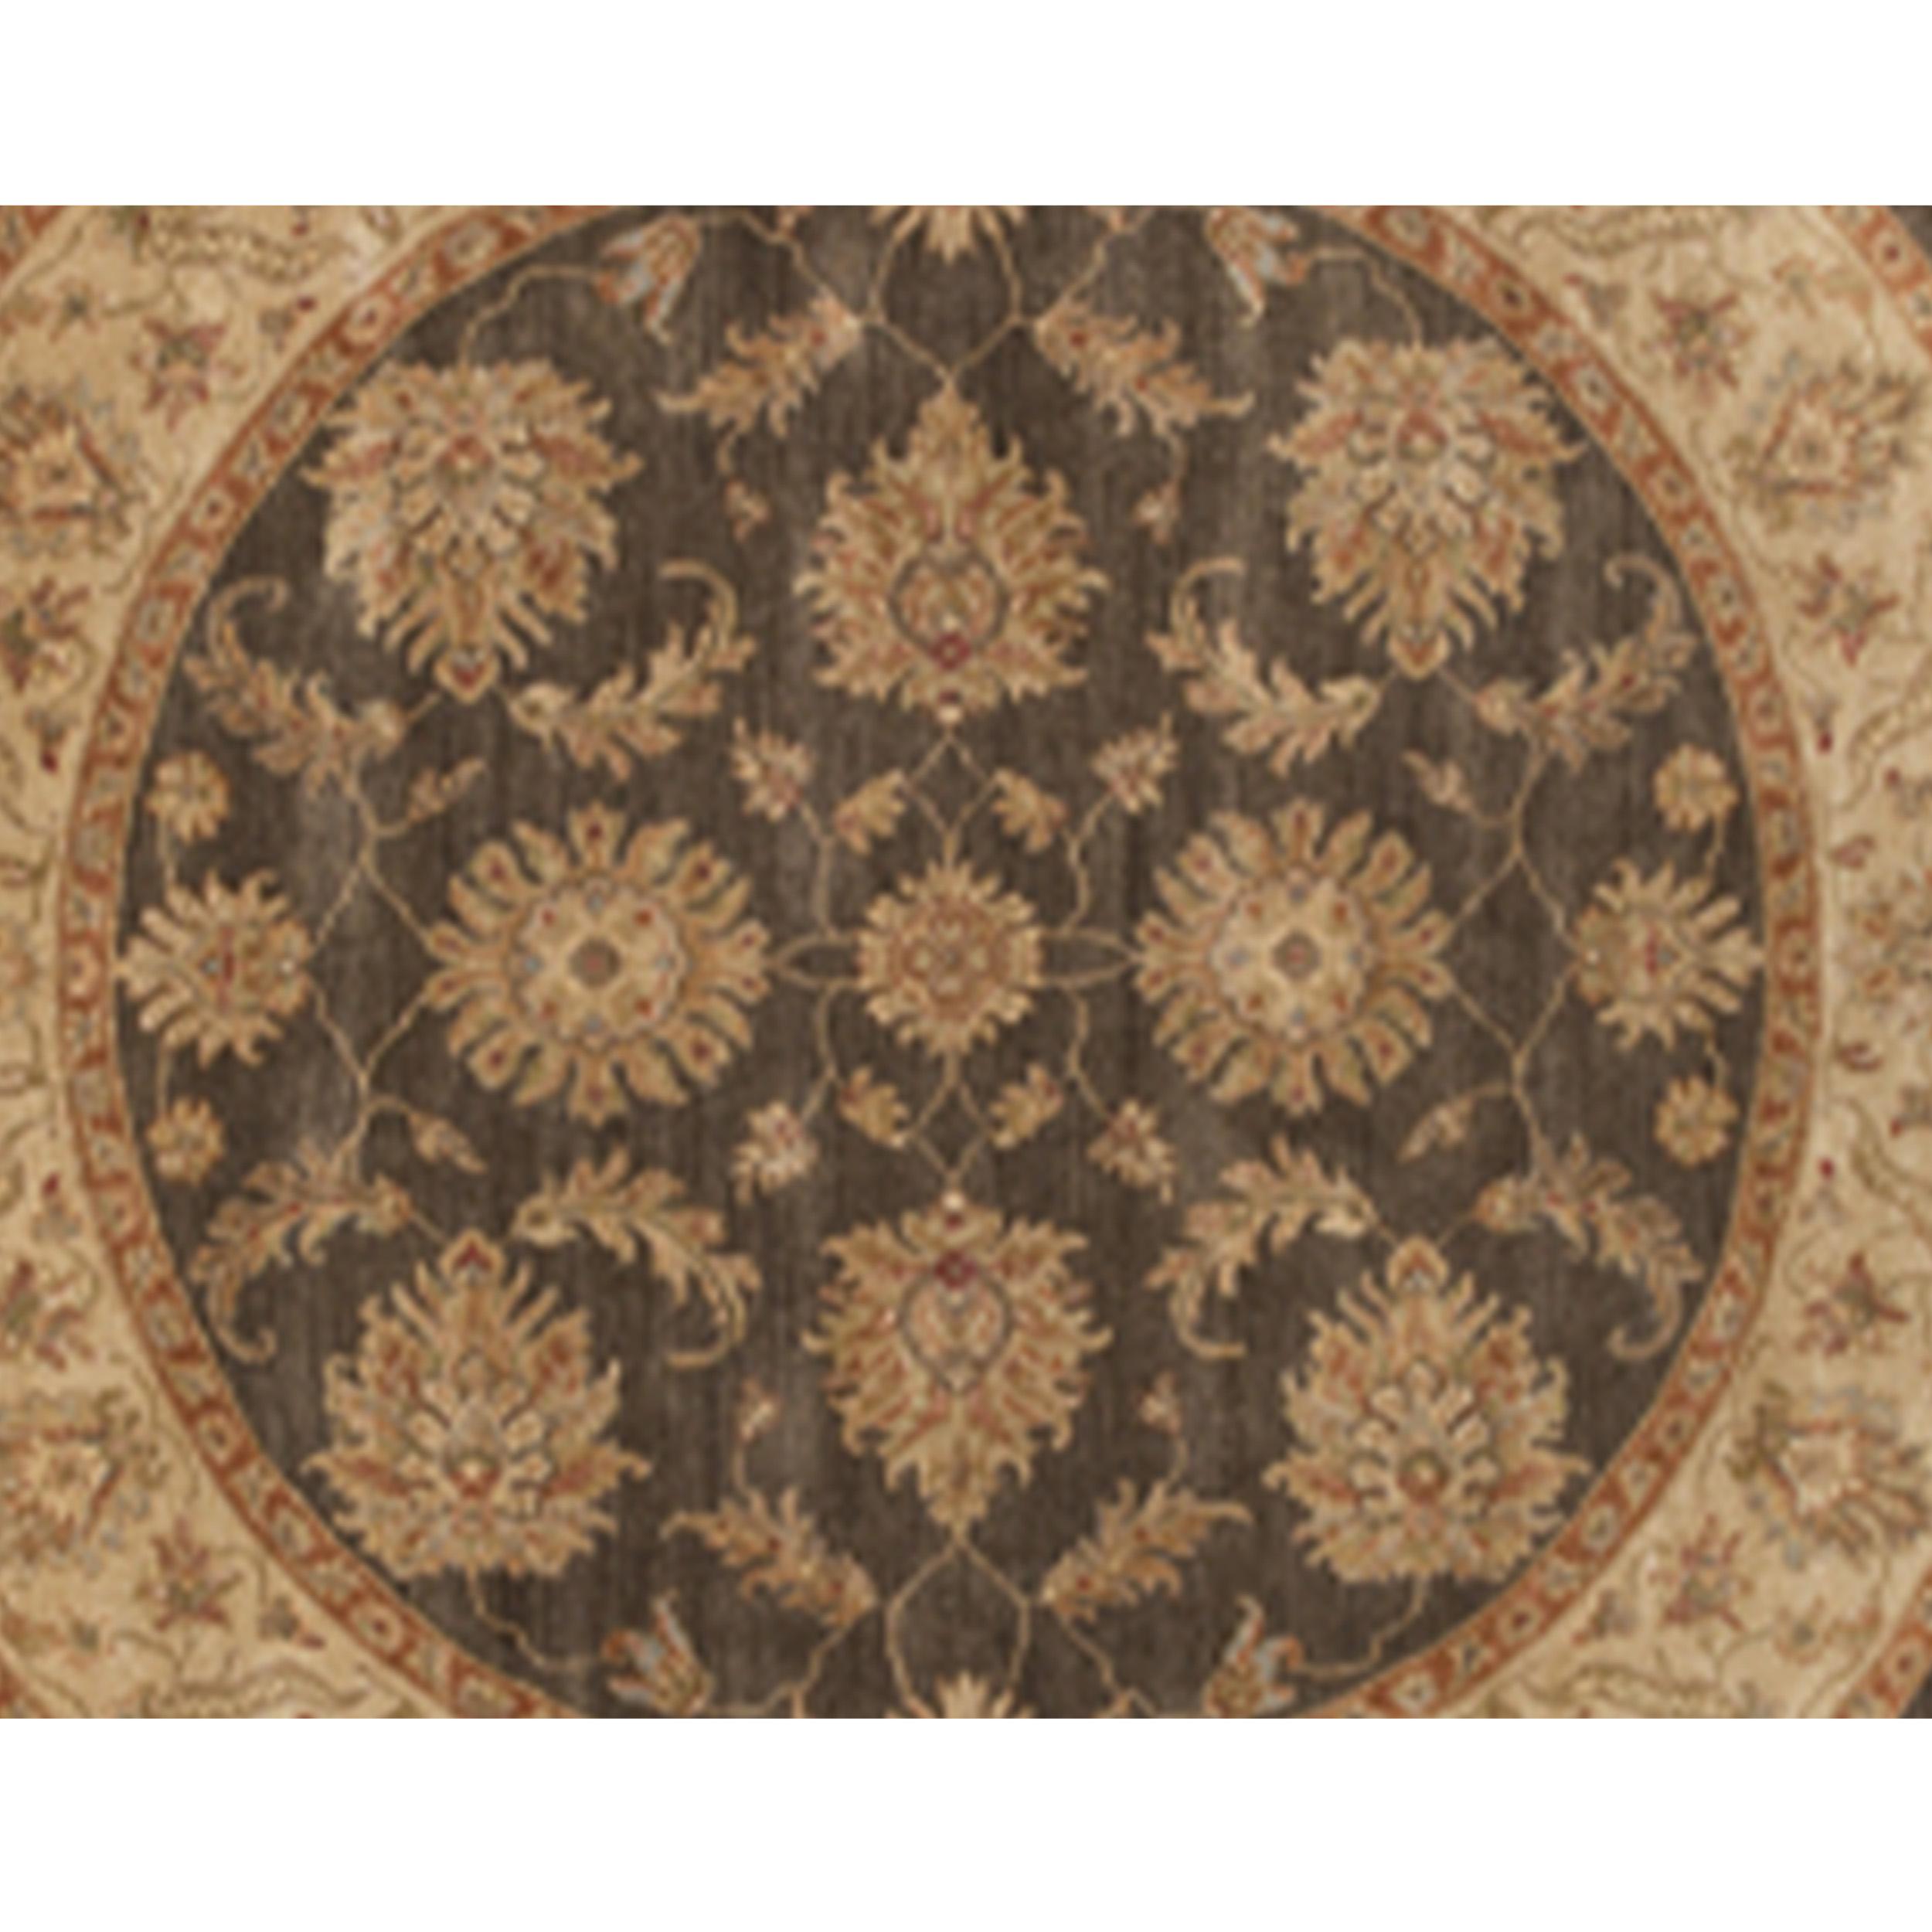 Agra Luxury Traditional Hand-Knotted Amritsar Ziegler Brown/Beige 12x12 Round Rug For Sale